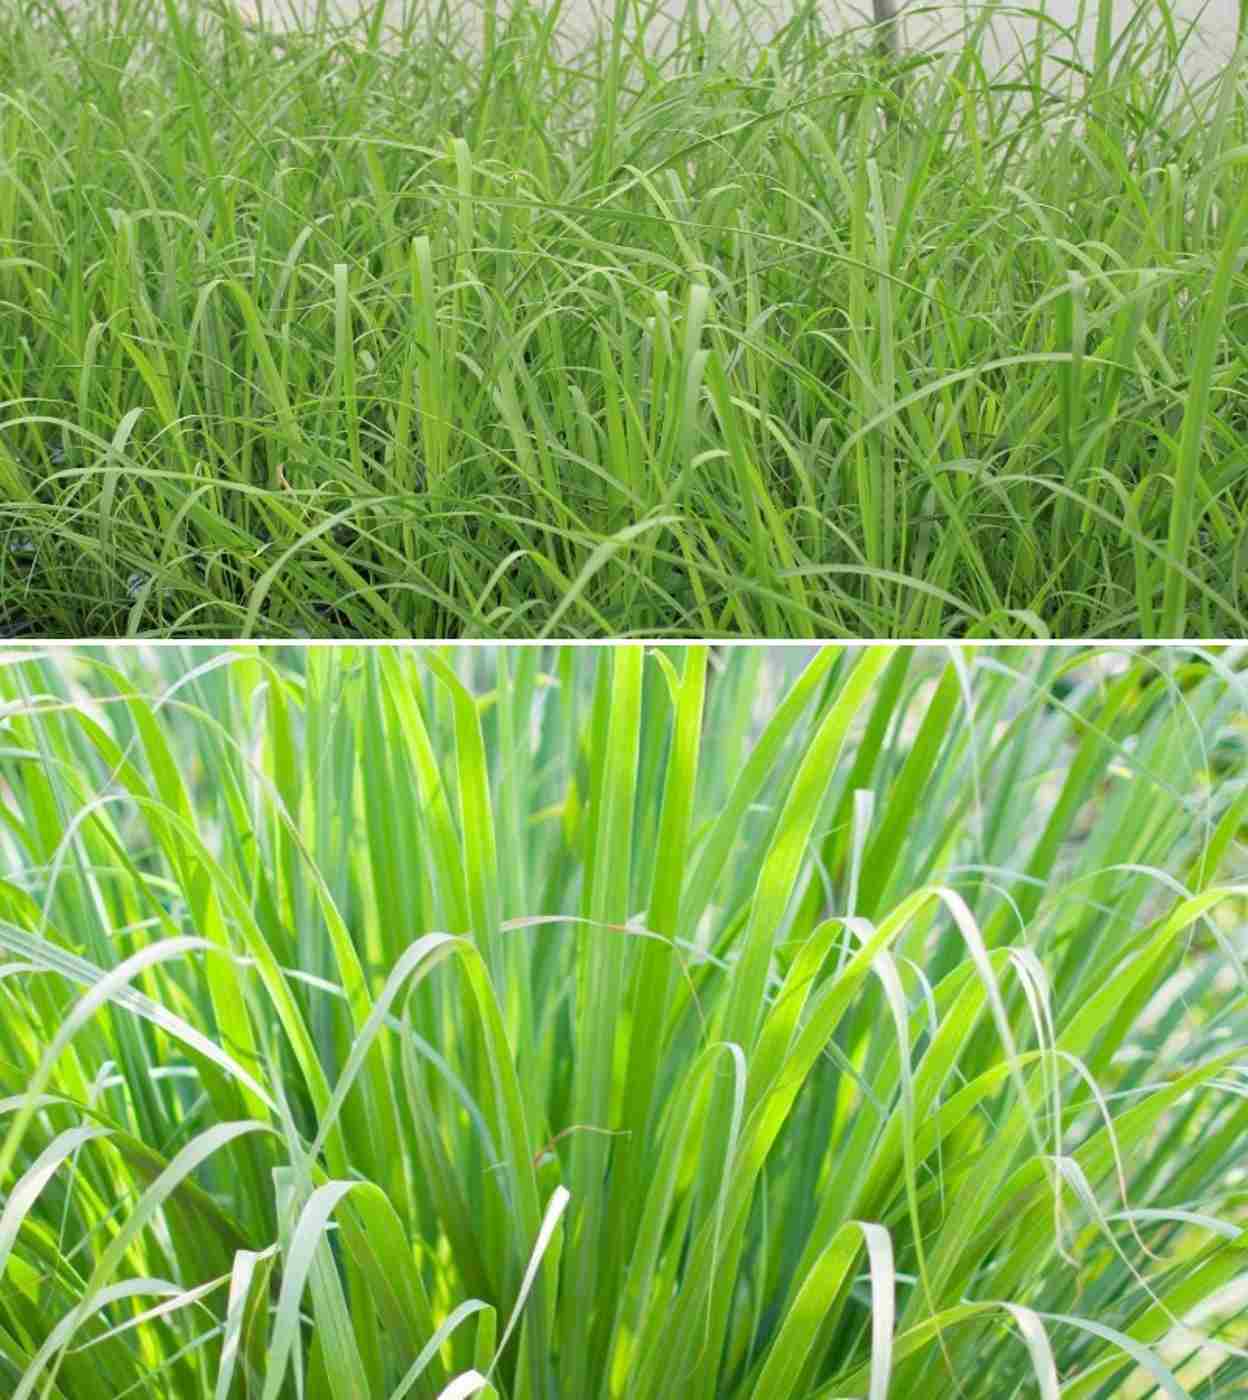 Growing Conditions for Hydroponic Lemon Grass.